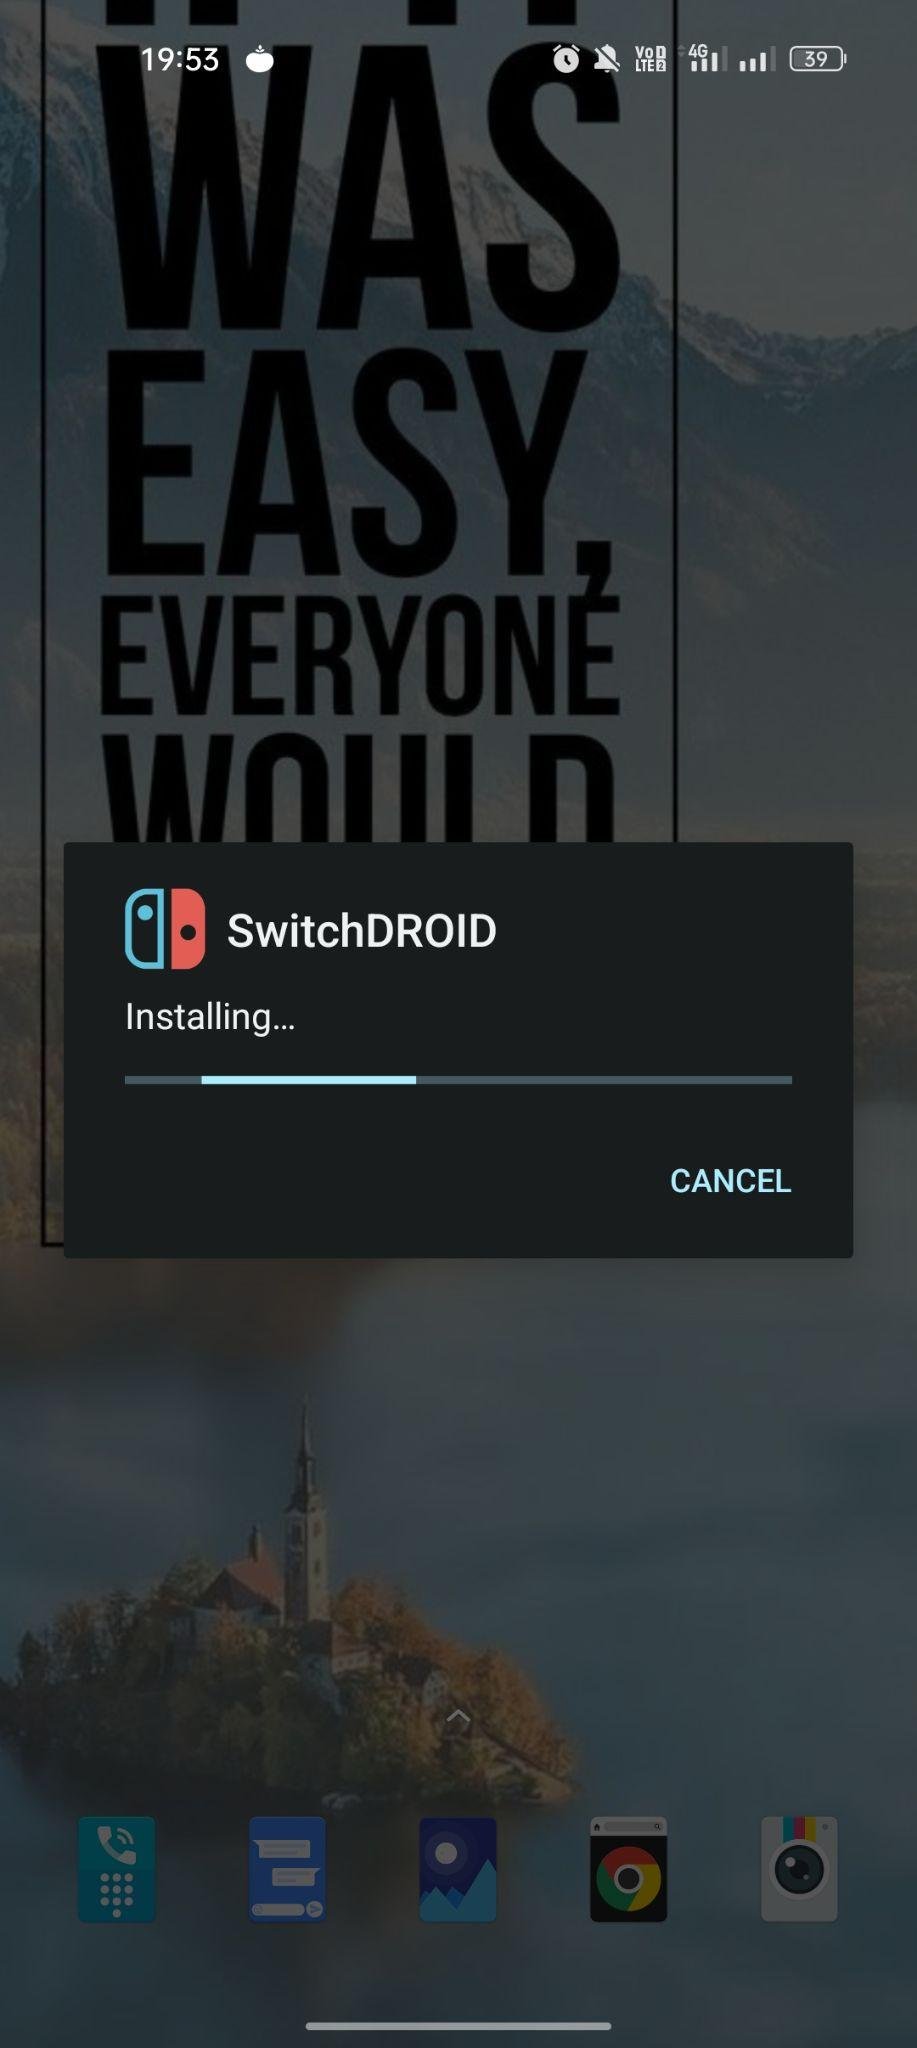 SwitchDROID apk installing